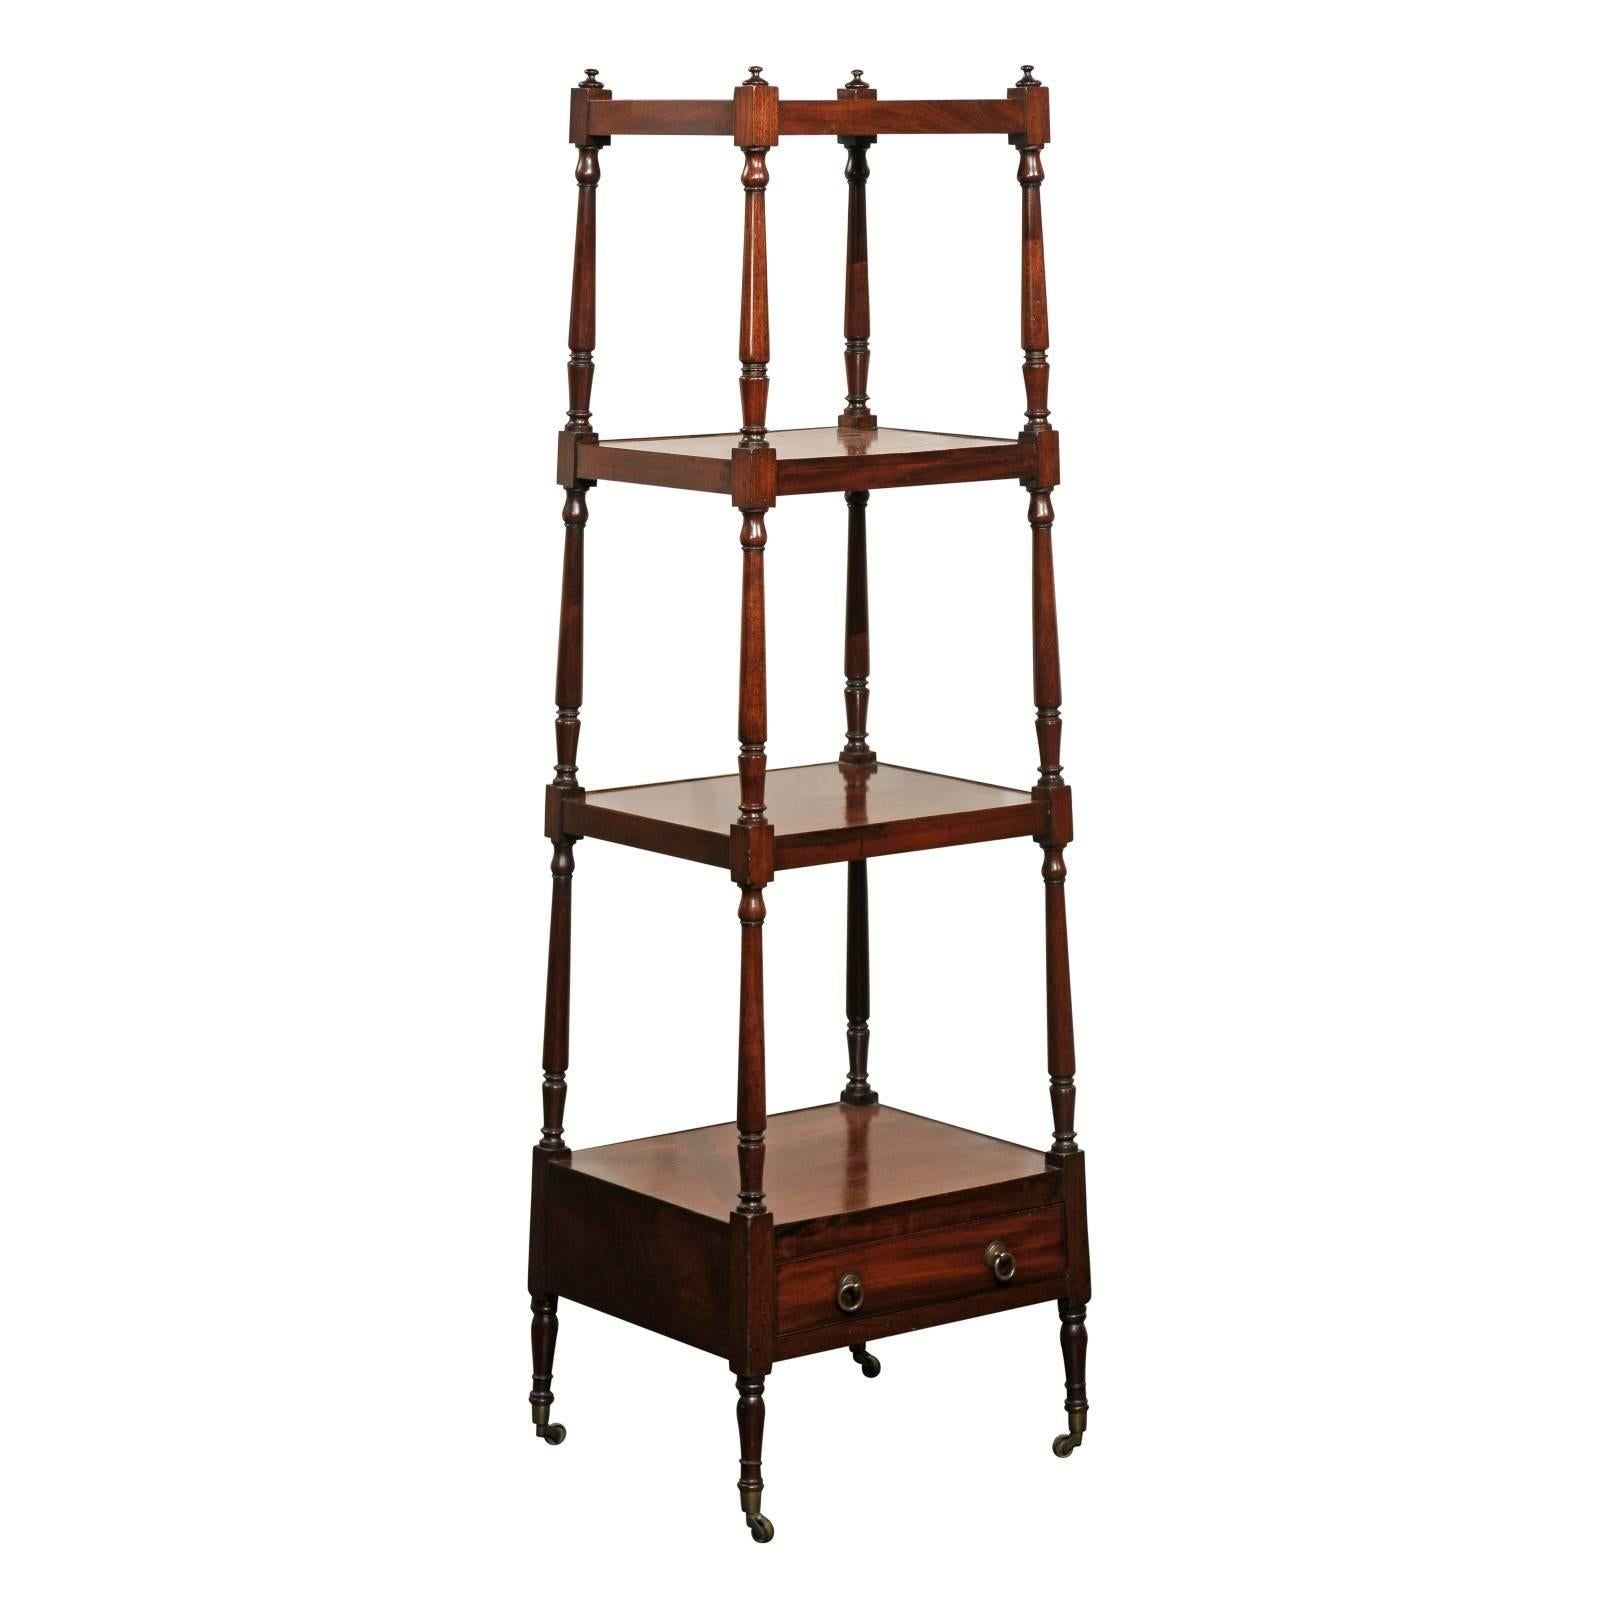 English Mahogany Trolley with Graduated Shelves from the Mid-19th Century | 1stDibs